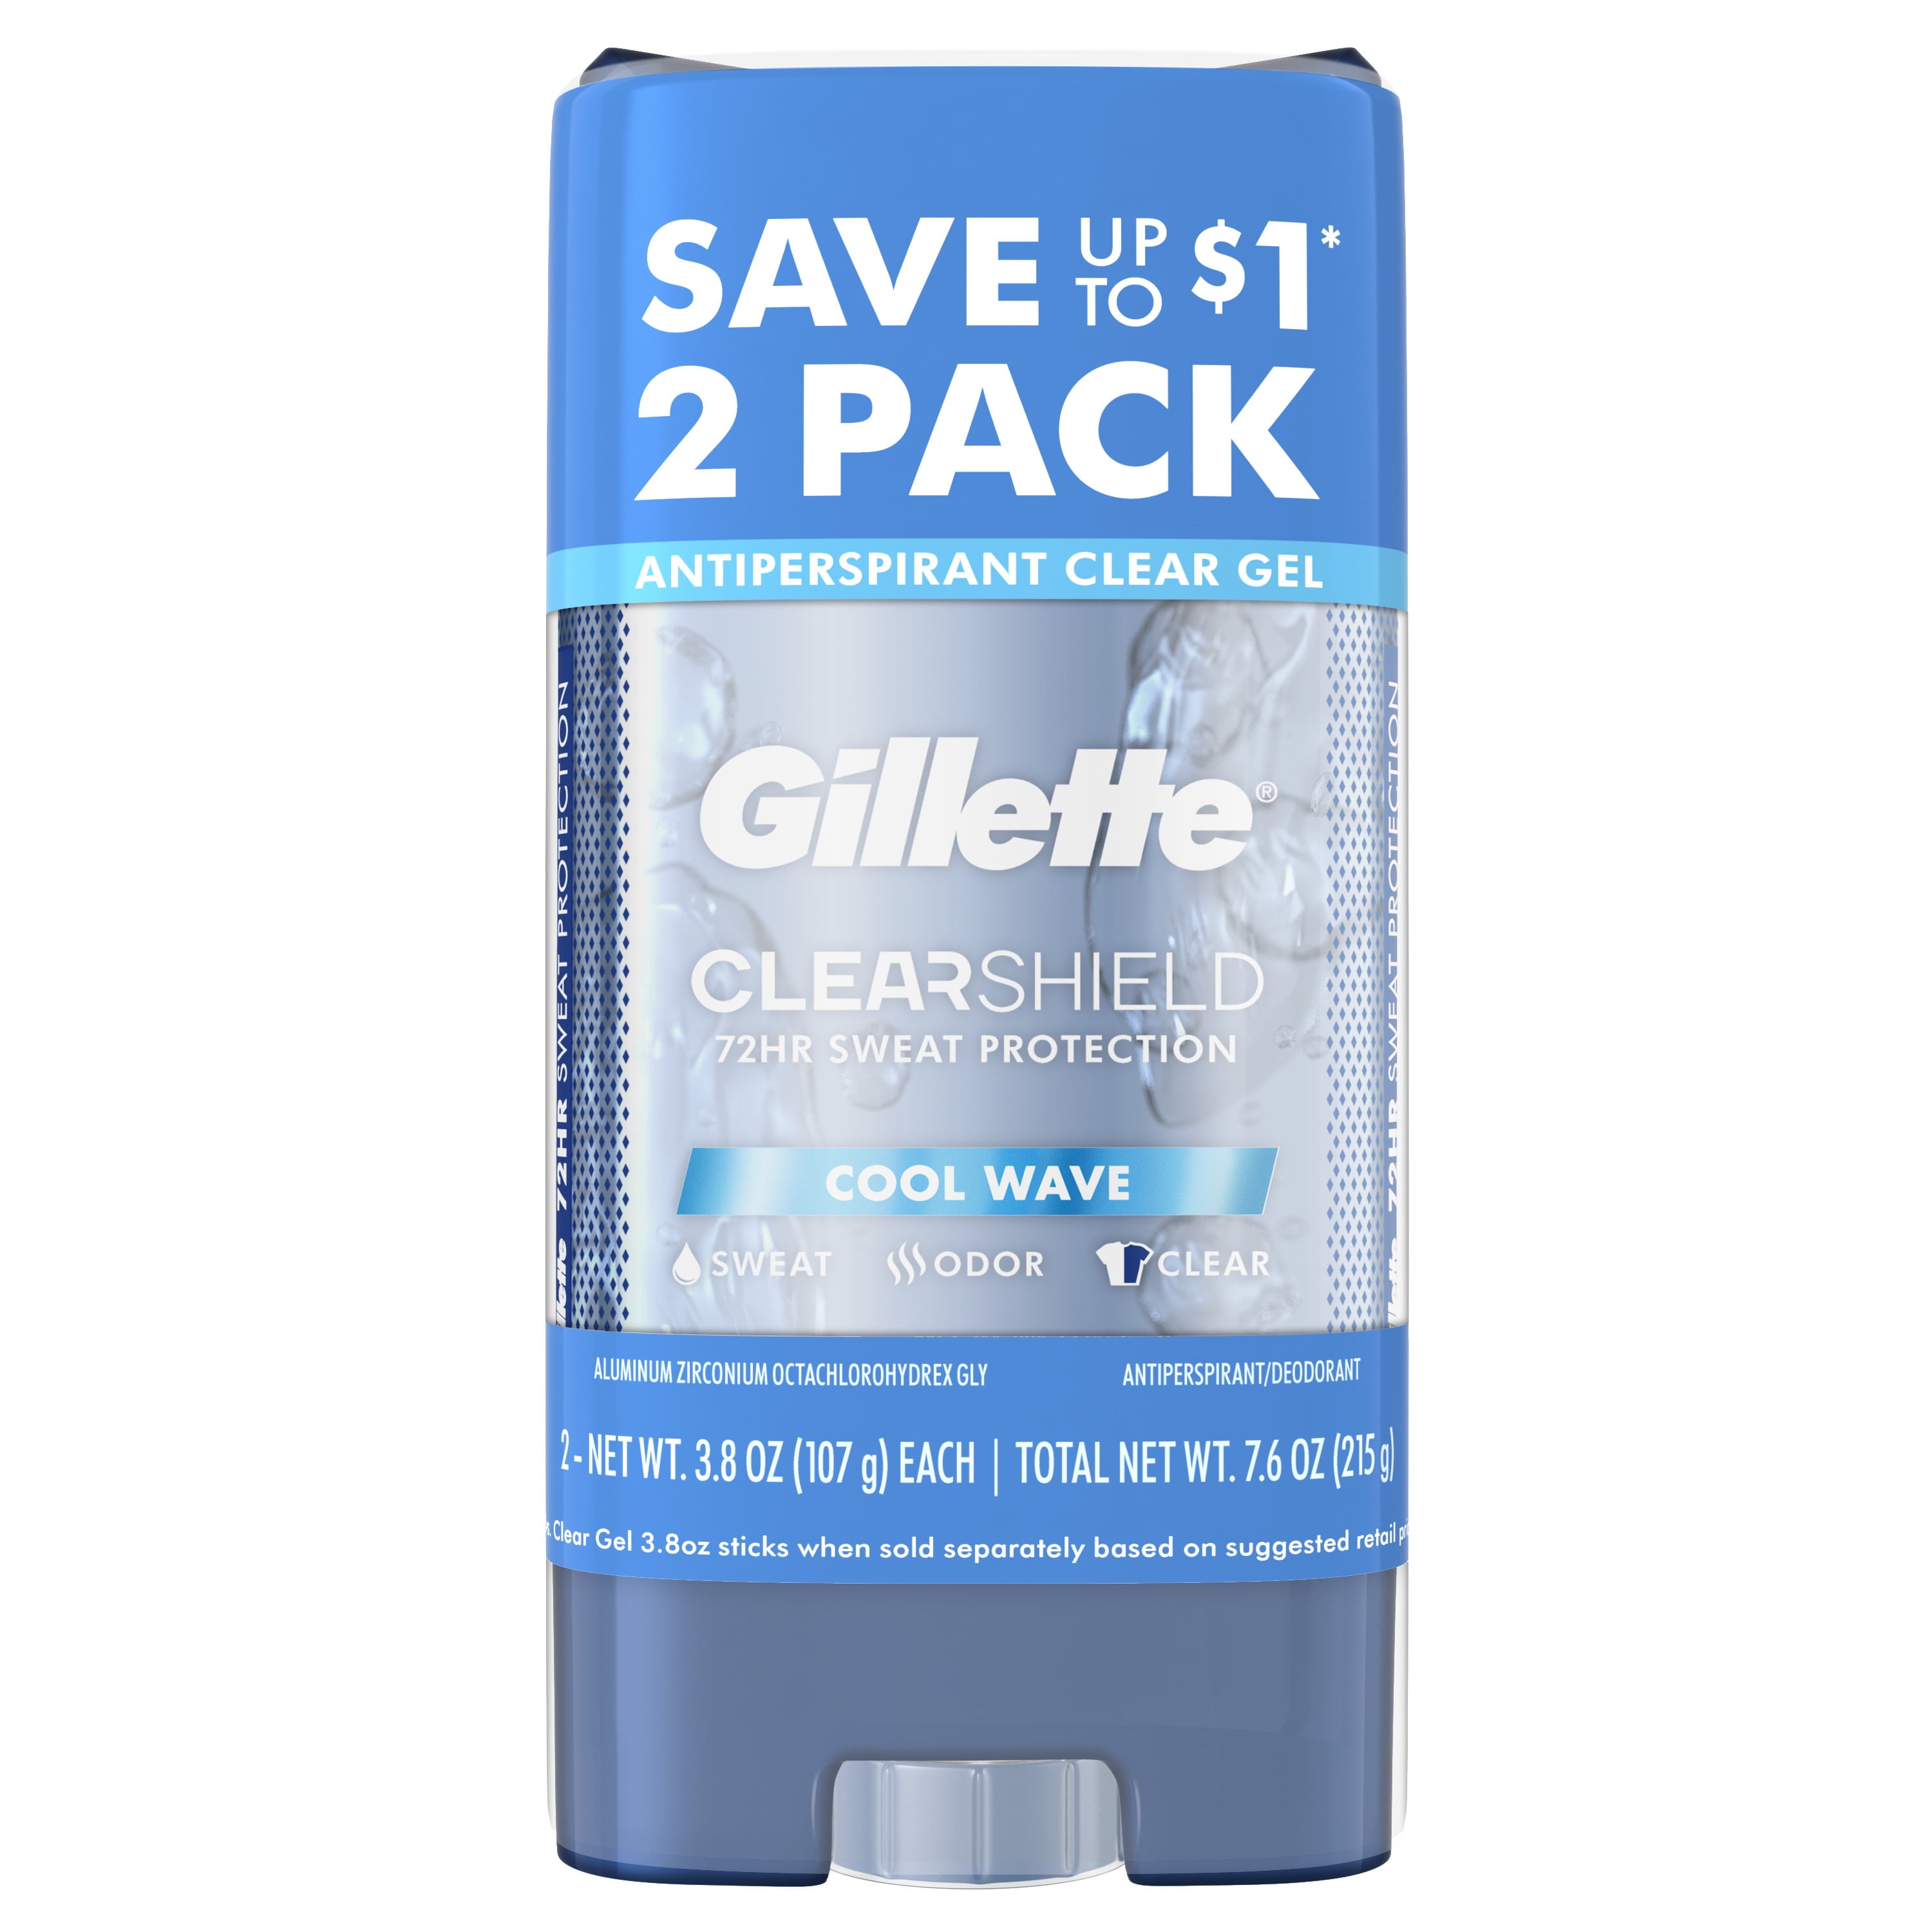  Gillette Antiperspirant and Deodorant for Men, Clear Gel, Wild  Rain Scent, 3.8 oz : Beauty & Personal Care